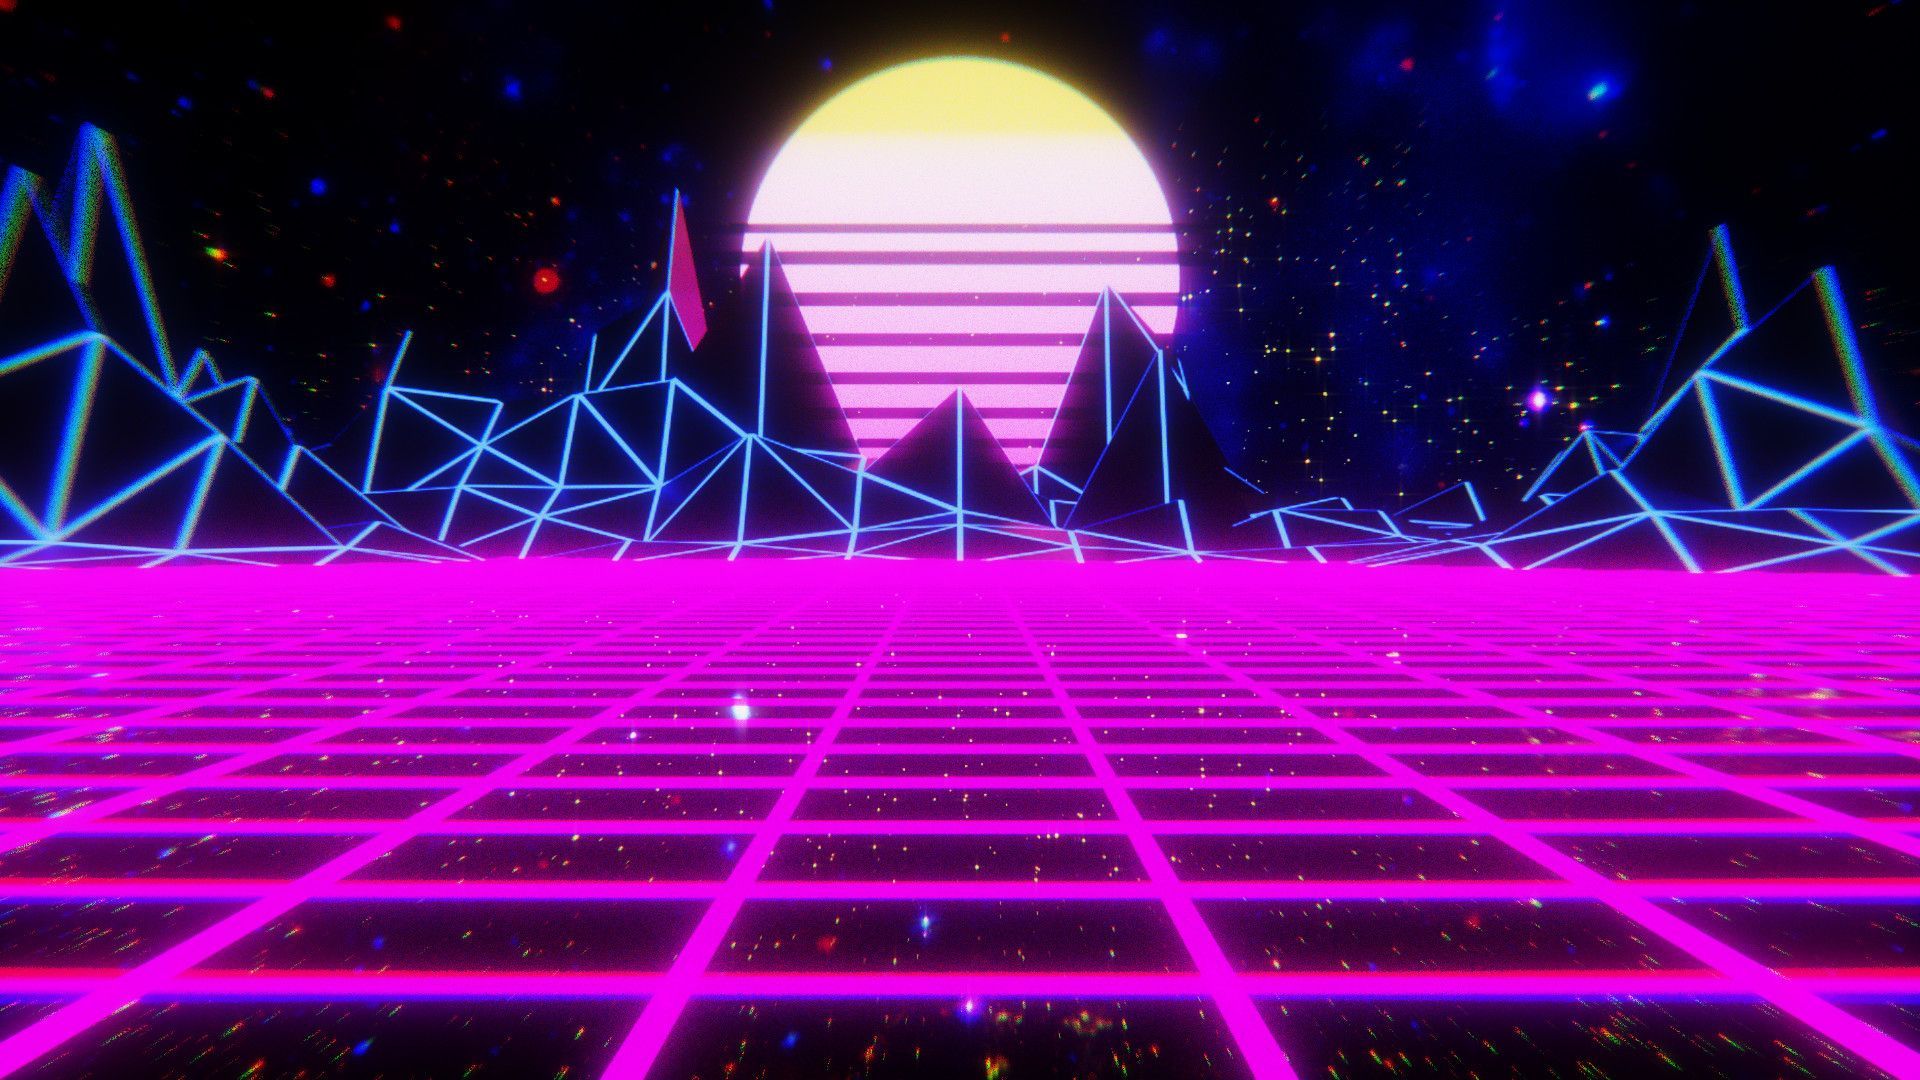 A neon colored background with mountains and stars - 1920x1080, technology, synthwave